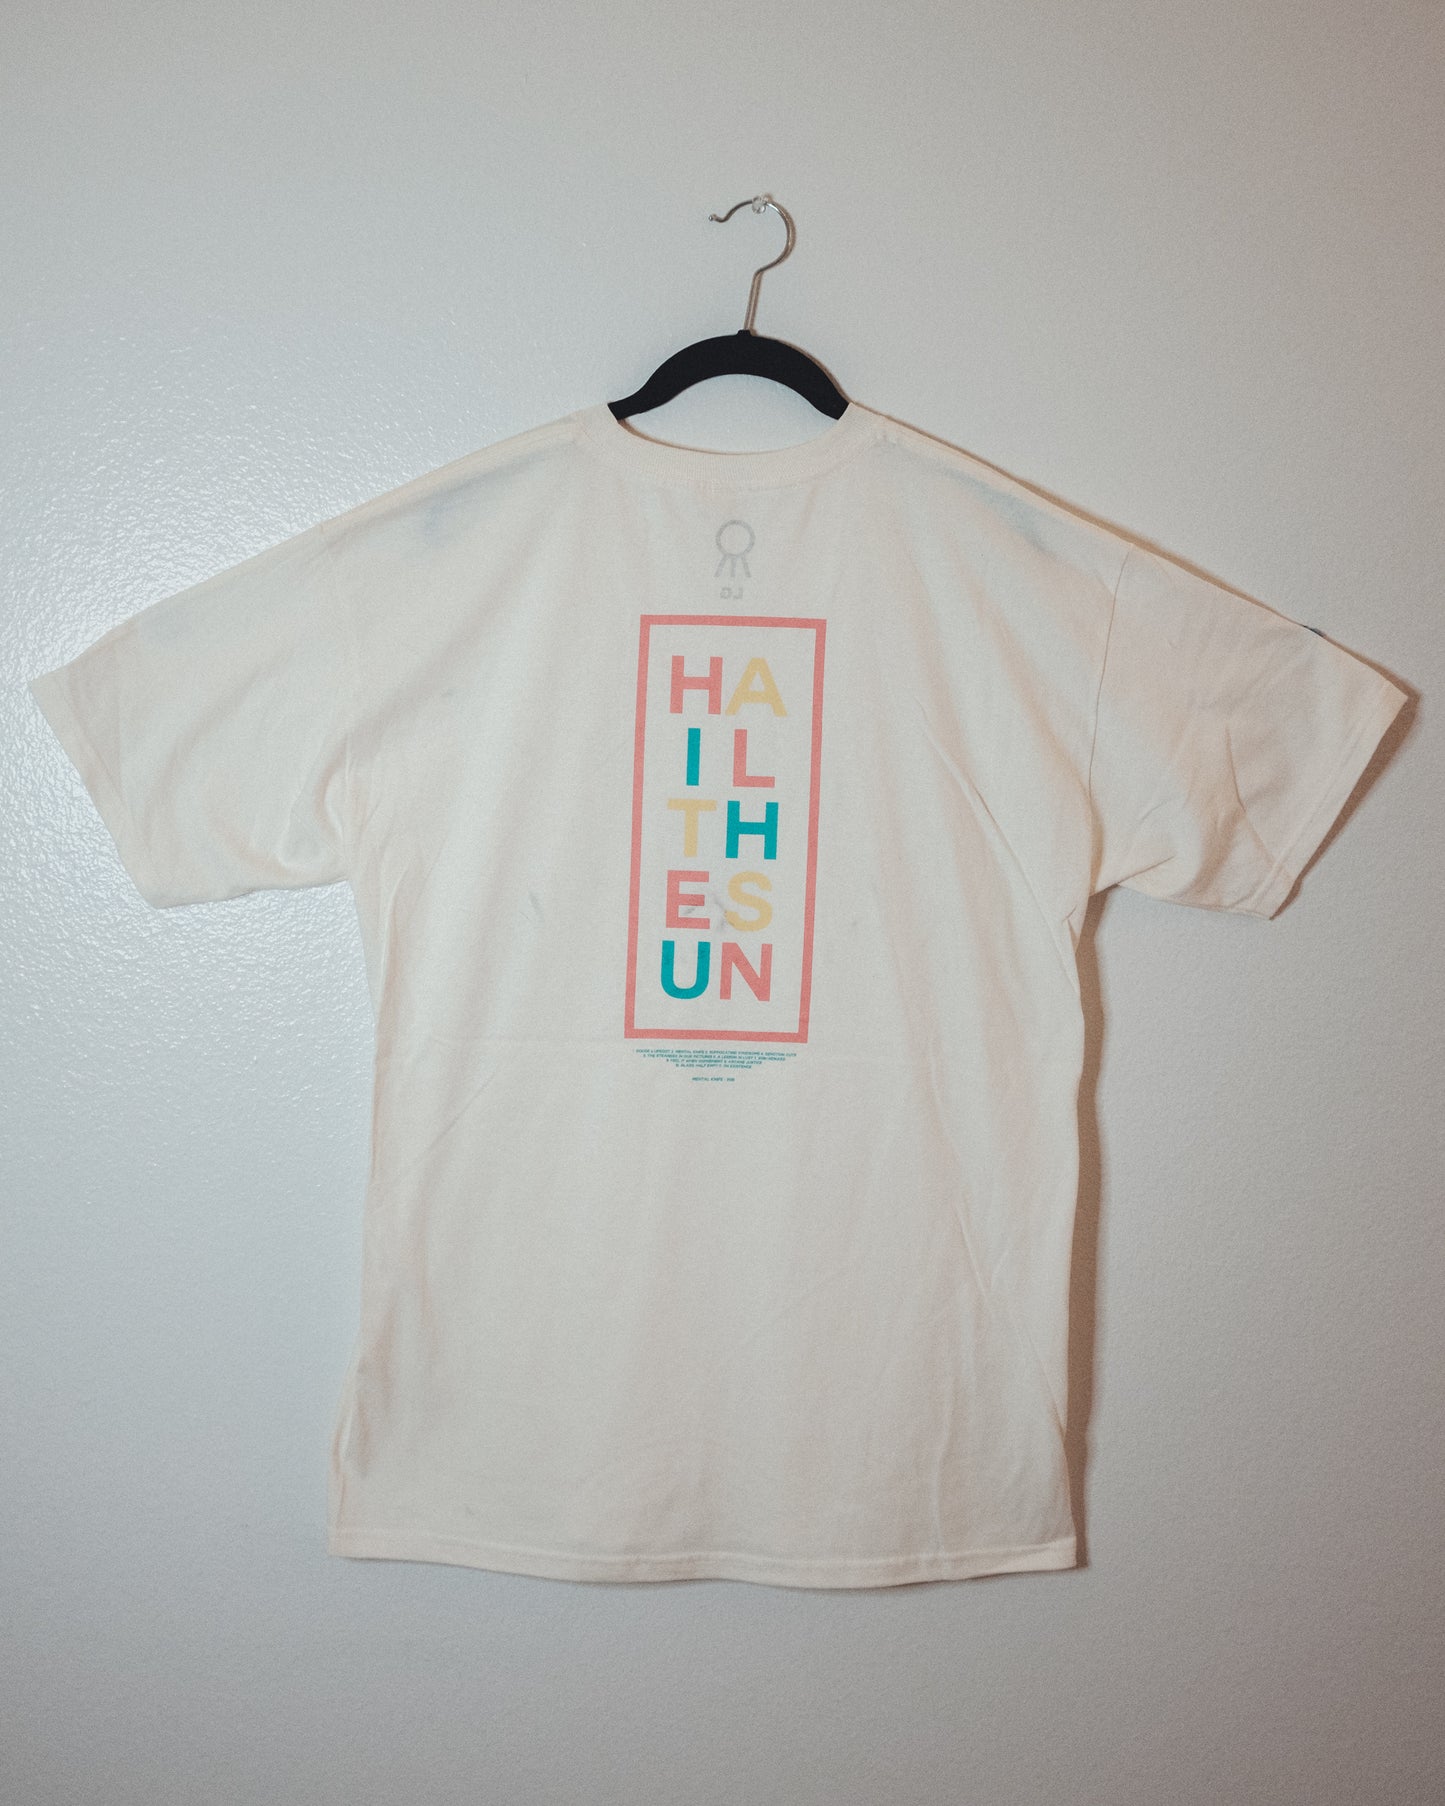 The Tri-Color Tee